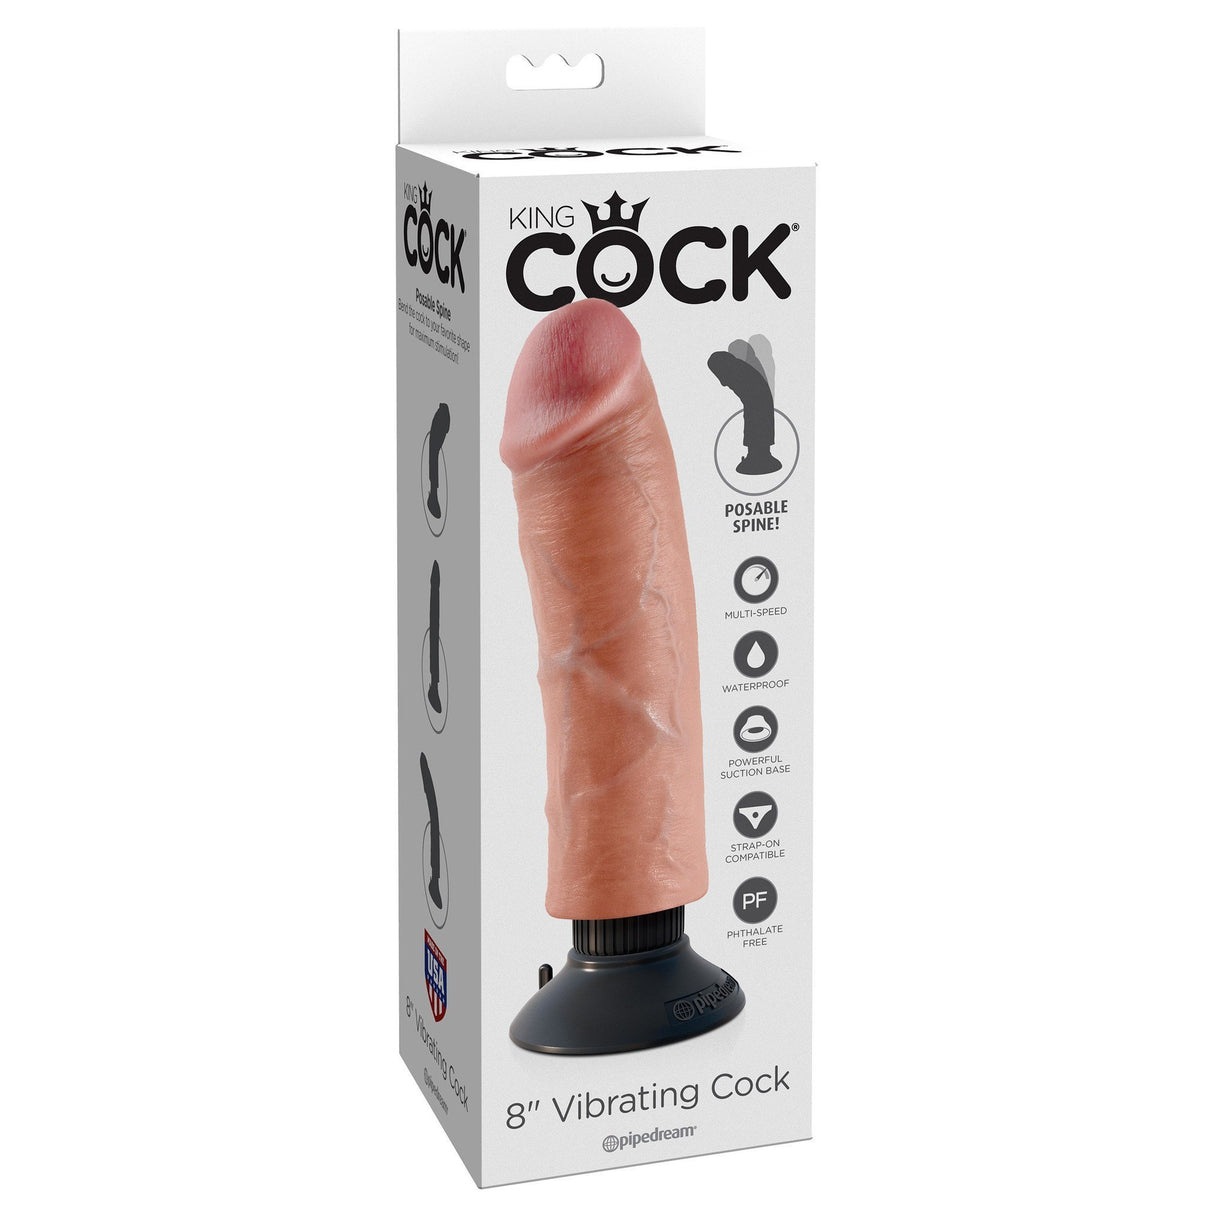 Pipedream - King Cock 8" Vibrating Cock (Beige) PD1537 CherryAffairs